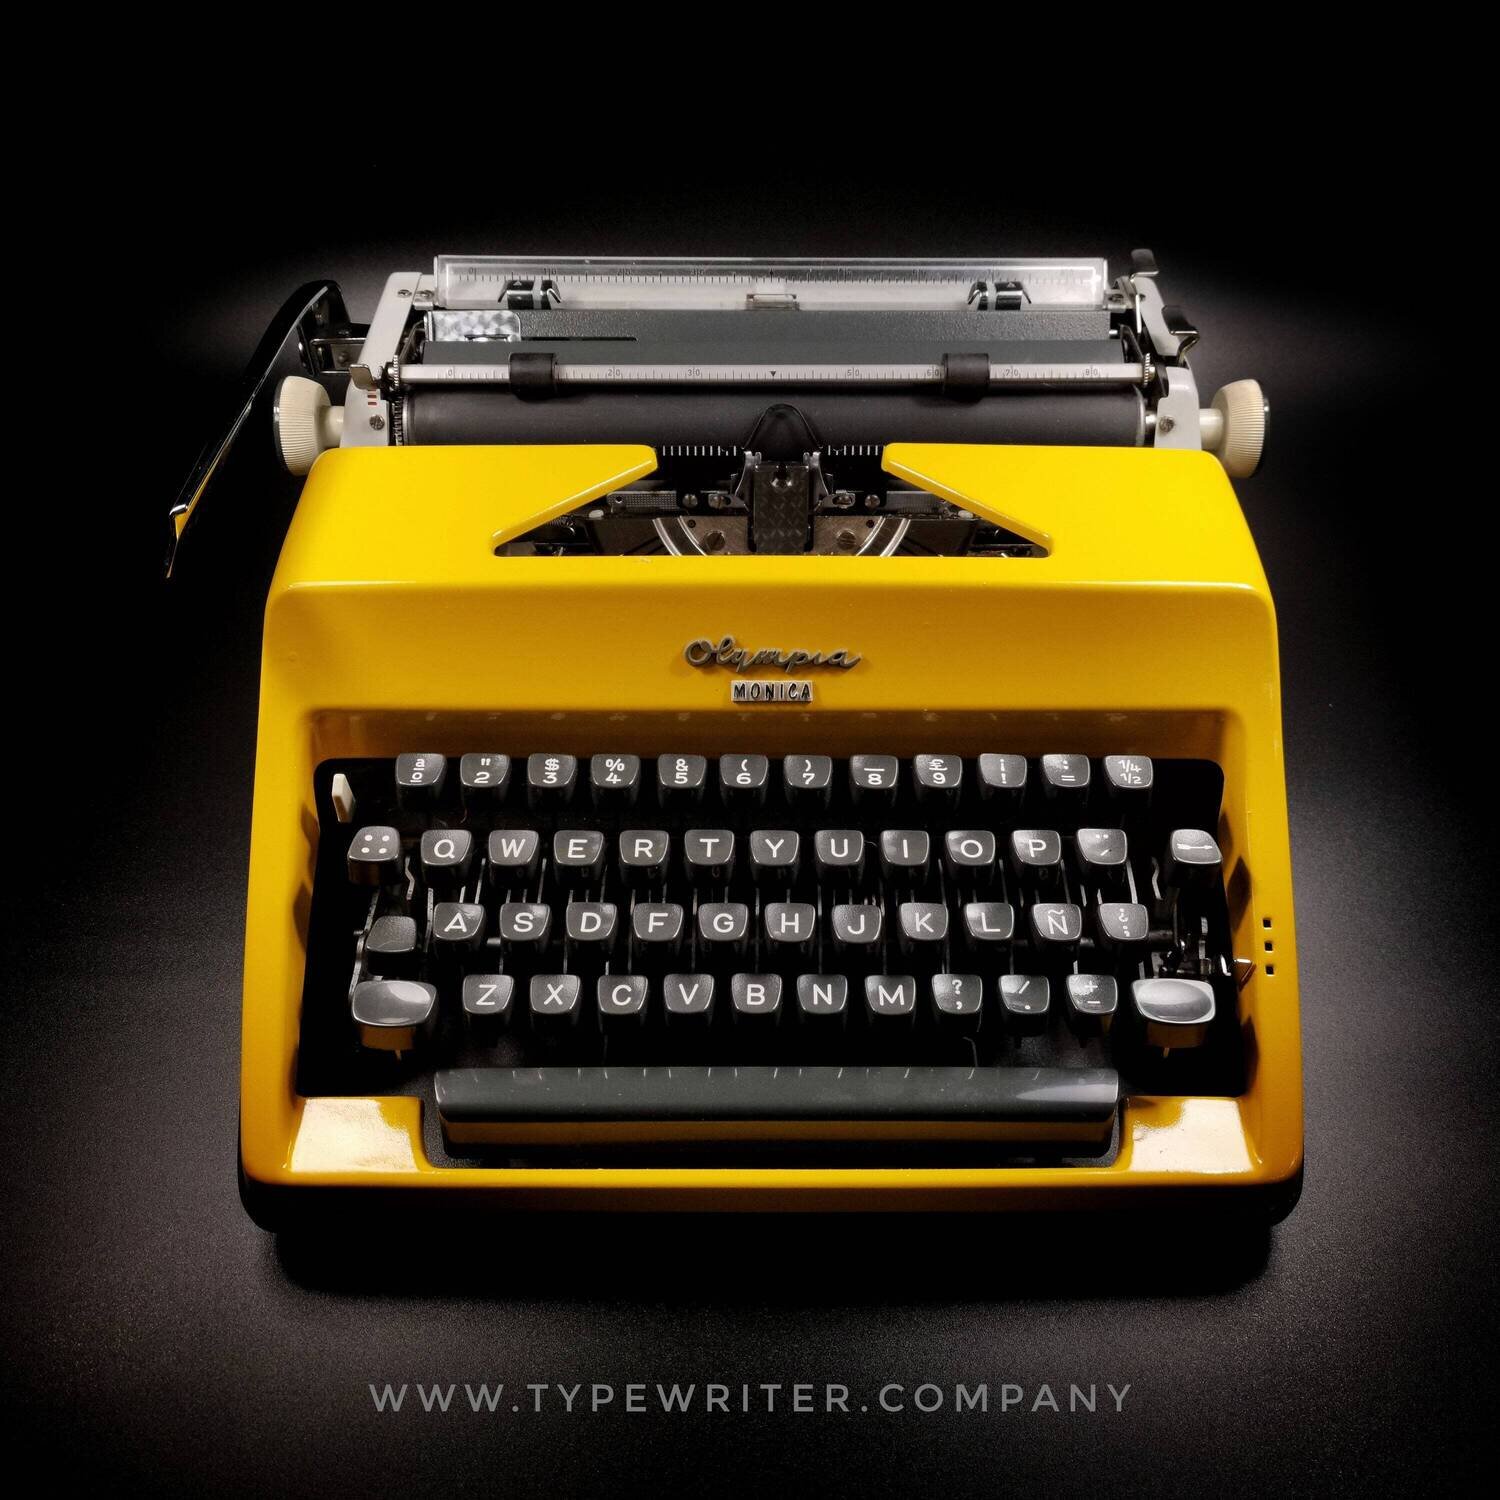 Limited Edition Olympia SM8 Yellow Typewriter, Vintage, Mint Condition, Manual Portable, Professionally Serviced by Typewriter.Company